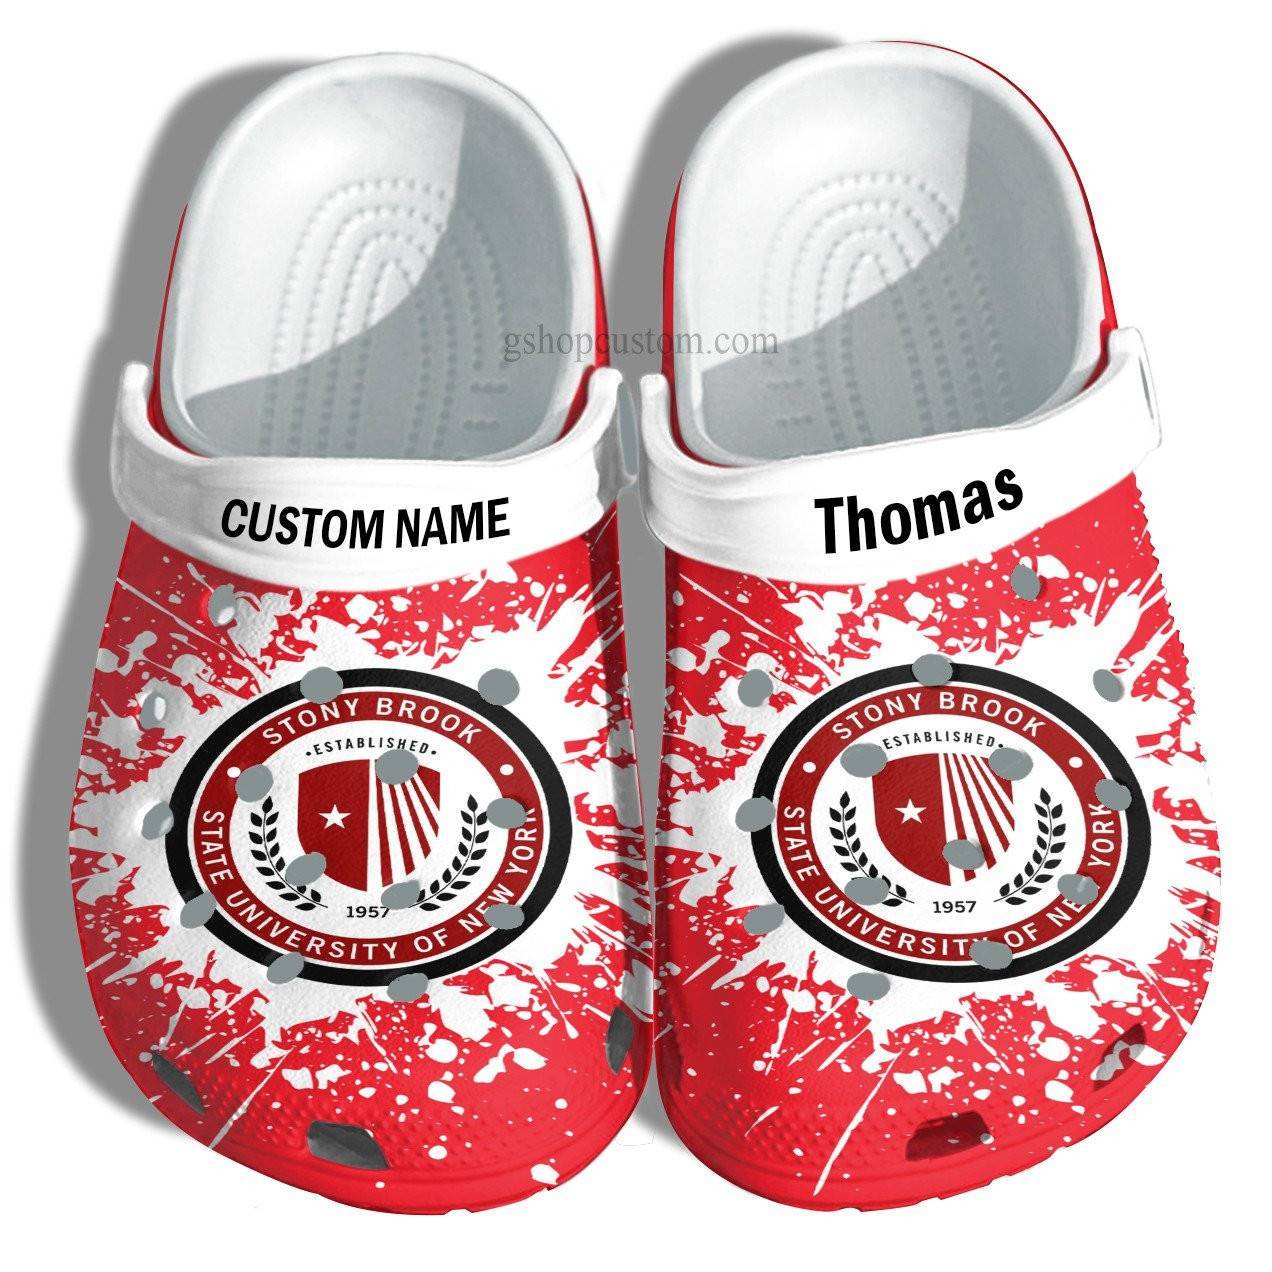 Stony Brook University Graduation Gifts Croc Shoes Customize – Admission Gift Crocss Shoes